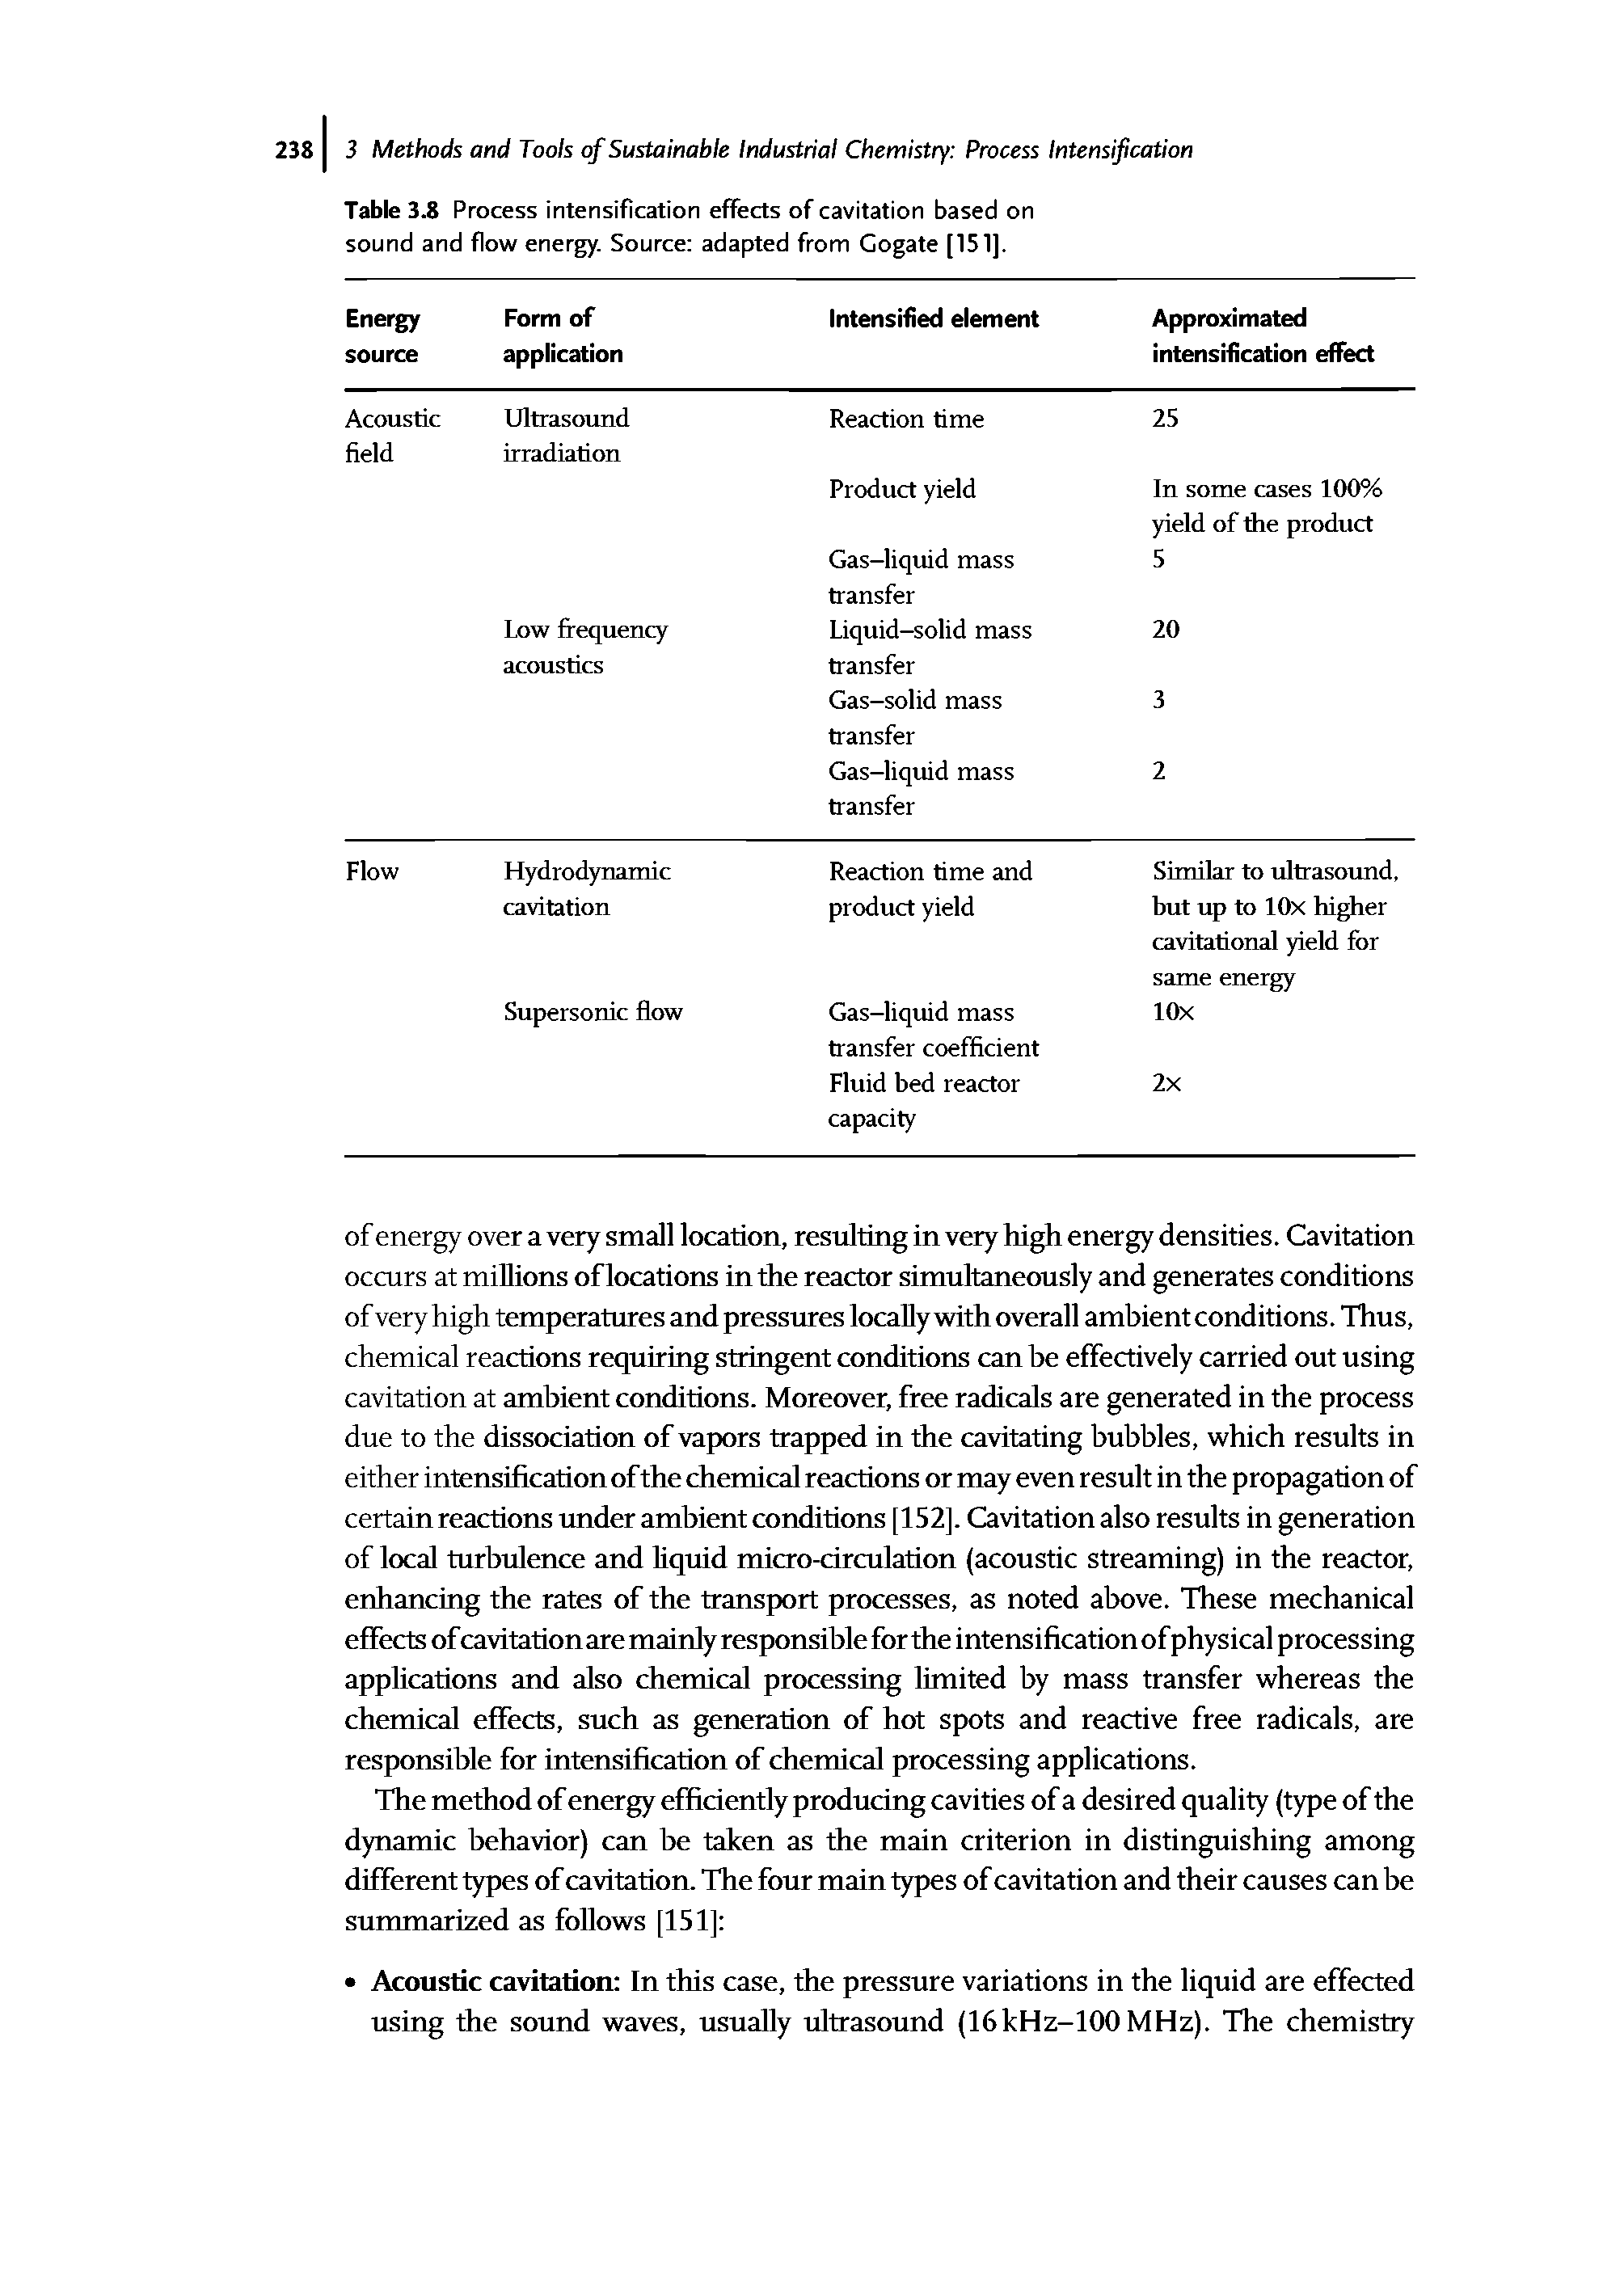 Table 3.8 Process intensification effects of cavitation based on sound and flow energy. Source adapted from Cogate [151].